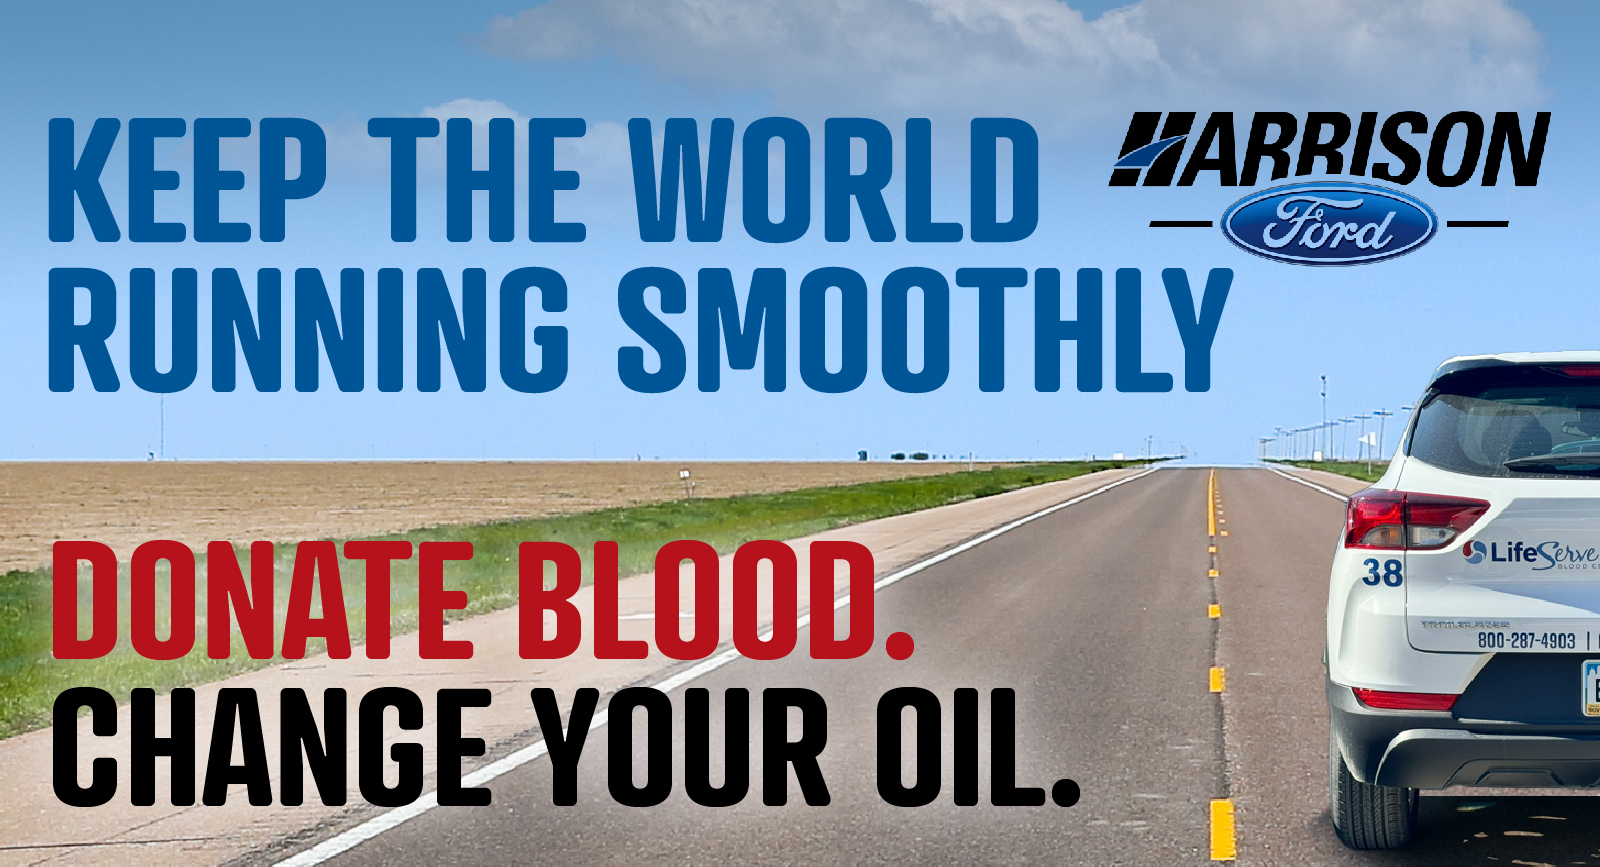 Donate Blood. Change Your Oil.